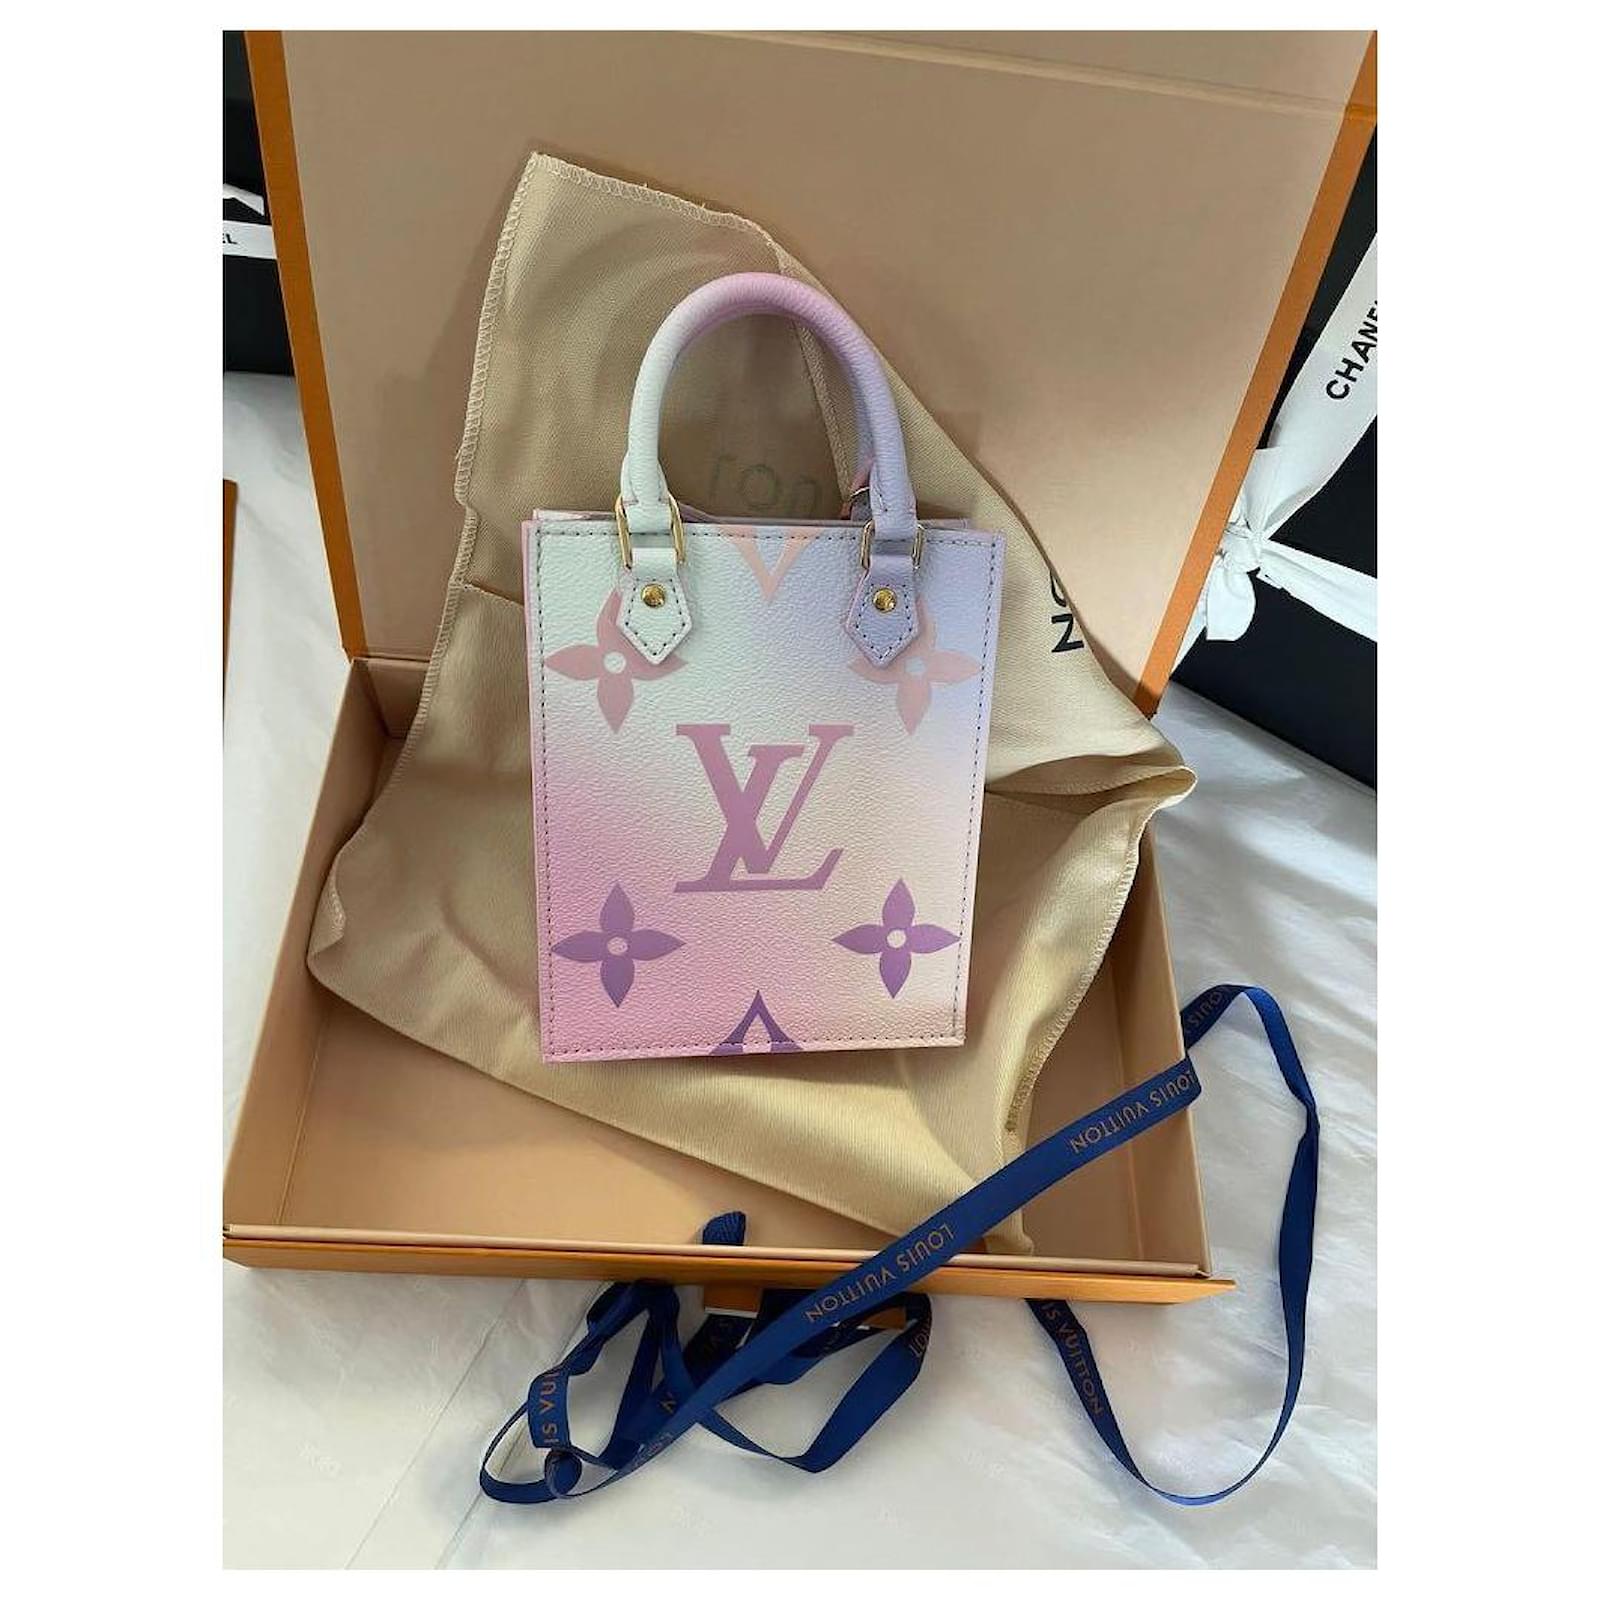 Plat leather handbag Louis Vuitton Pink in Leather - 26170228